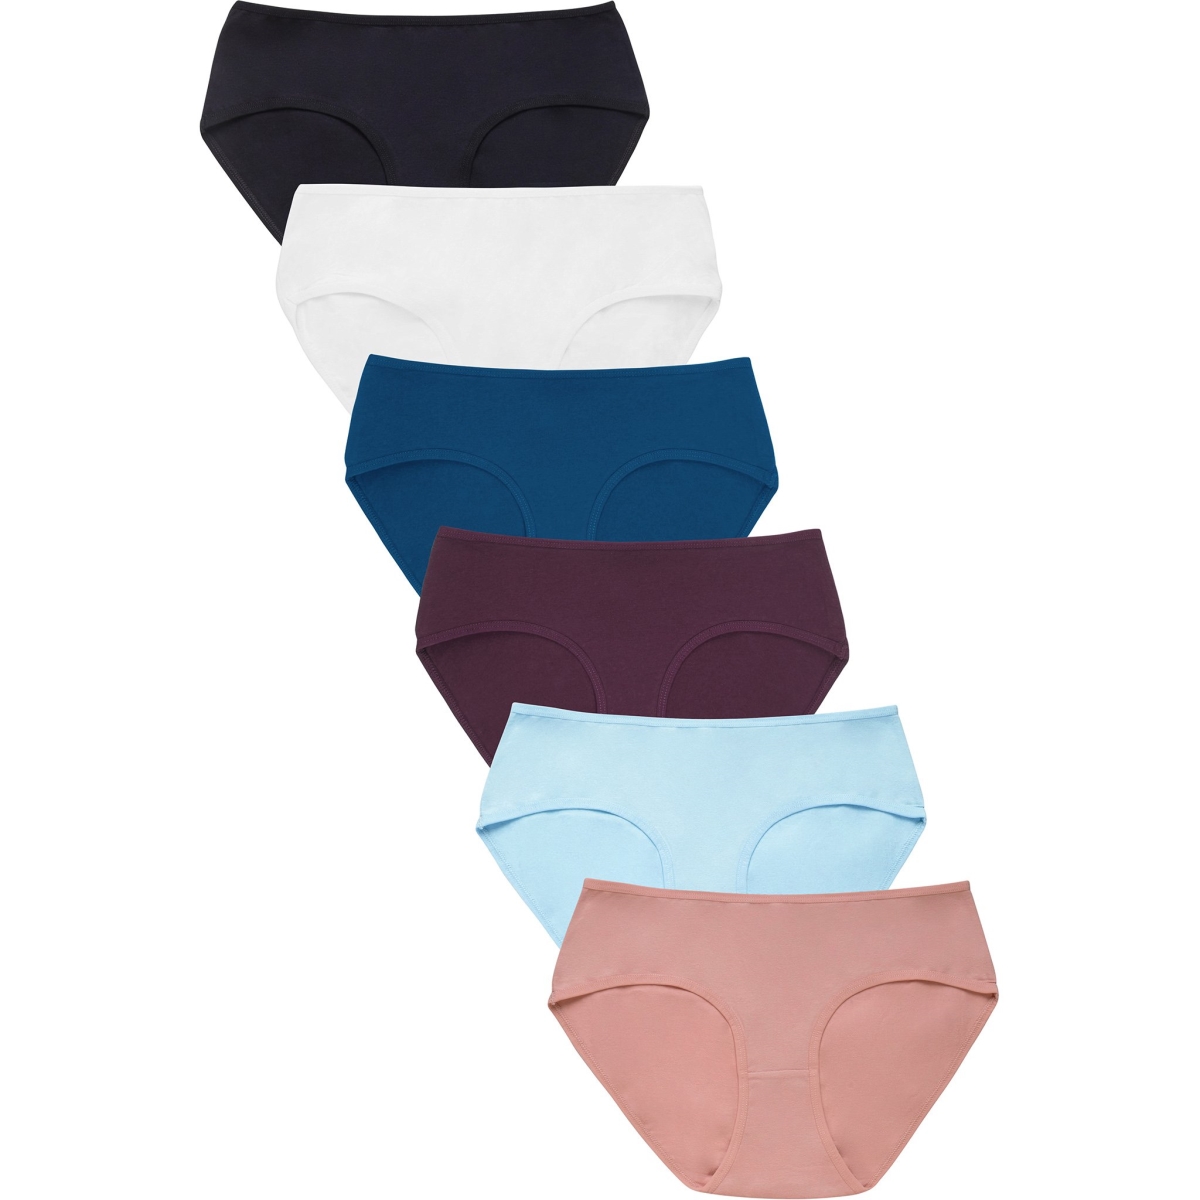 Picture of 247 Frenzy 247-LP1379CKE9-MD Womens Essentials Cotton Stretch Bikini Panty Underwear with Extended Side Seams - Assorted Color - Medium - Pack of 6